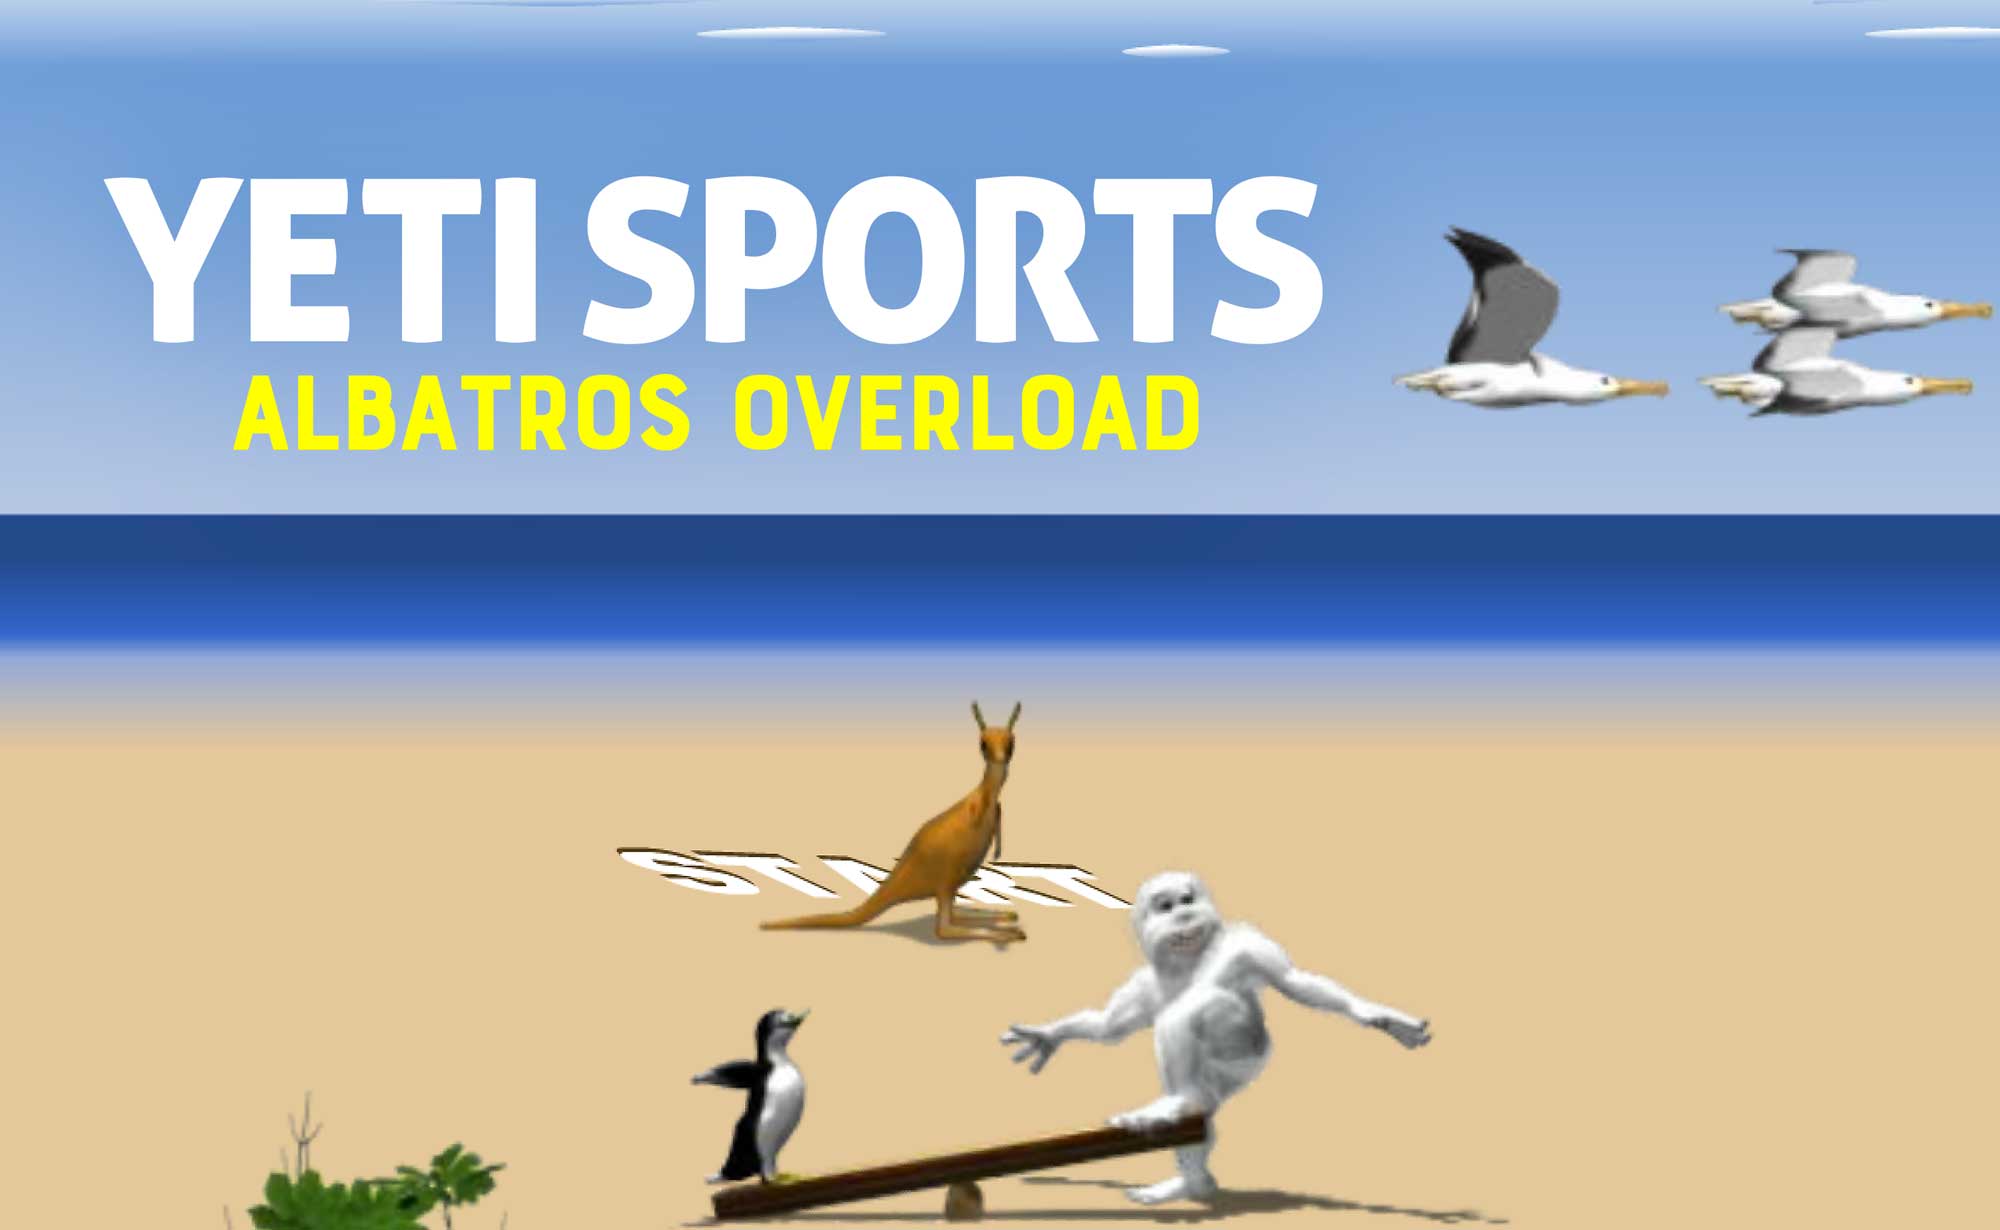 Yeti Sports: Albatros Overload - Play Now For Free